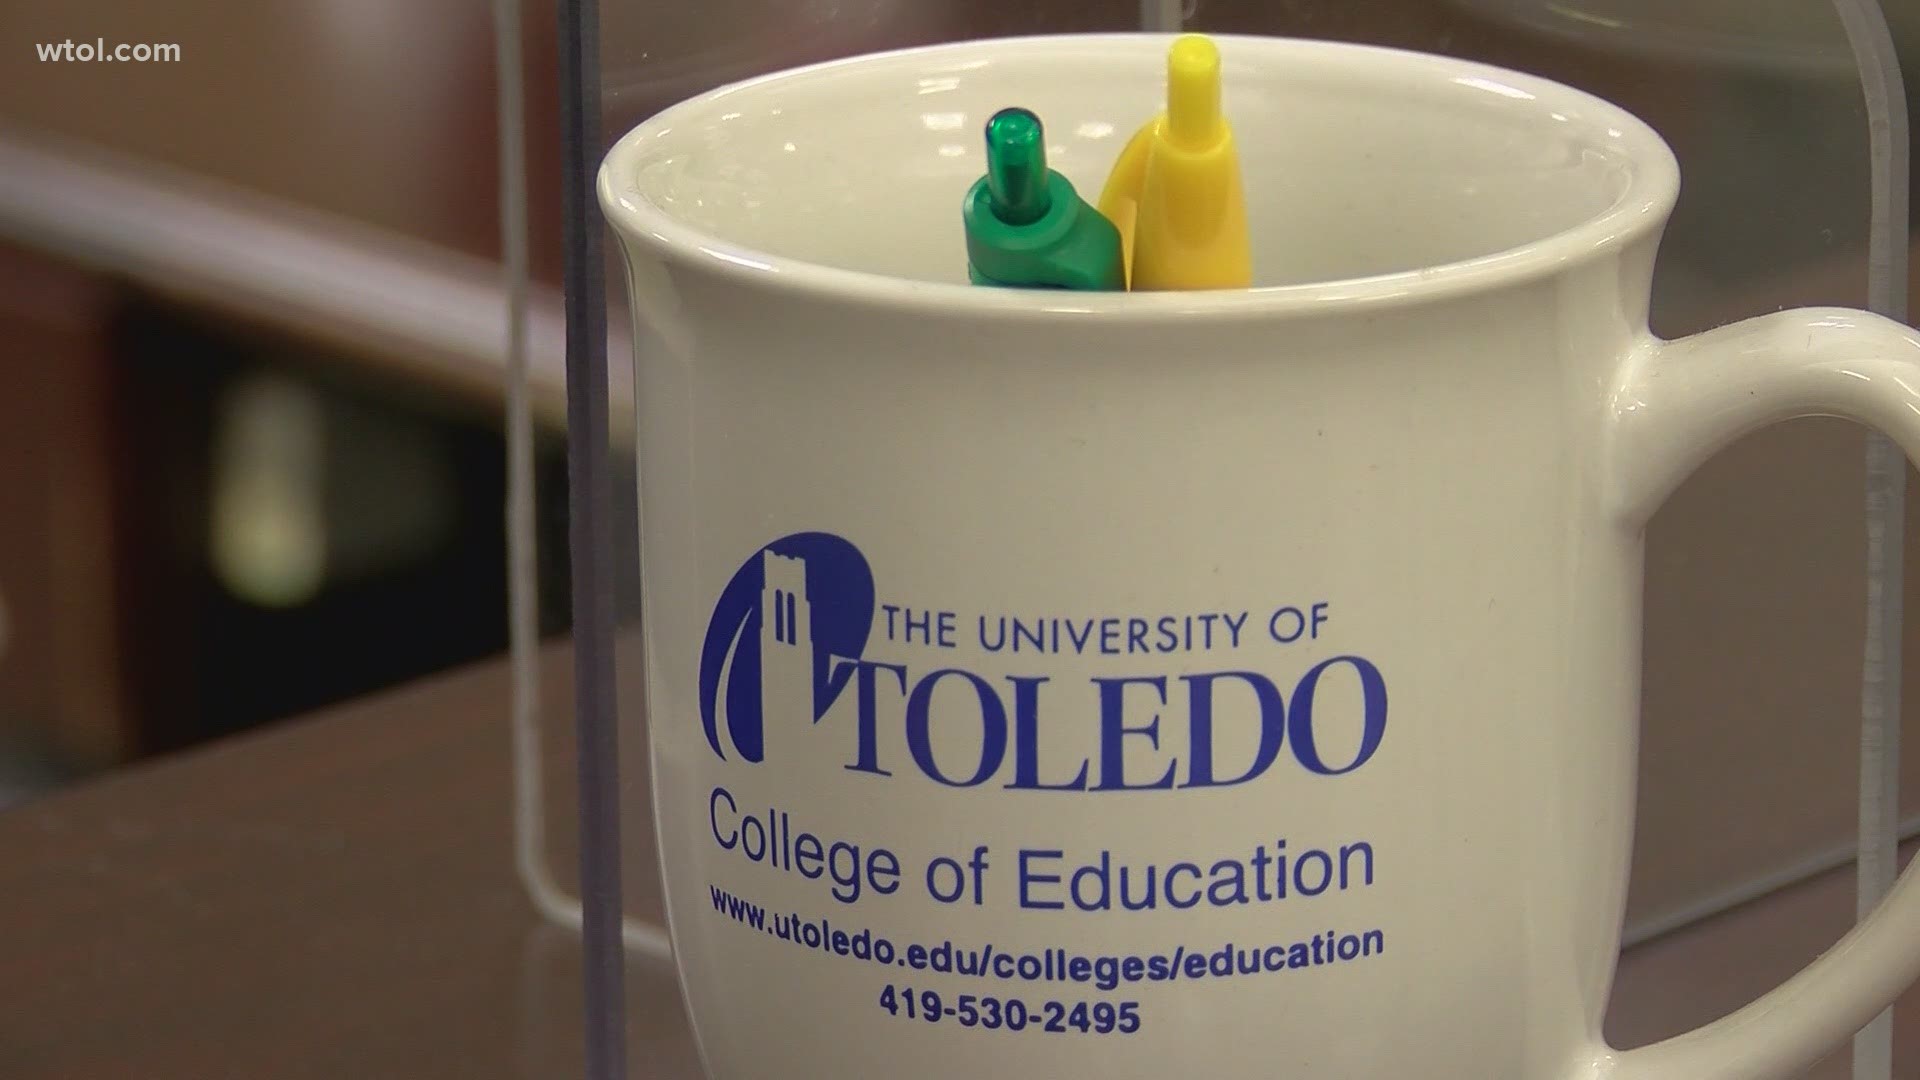 Julianna Pyle, an early education senior at the University of Toledo, says the pandemic has really made the road to becoming a teacher more difficult.